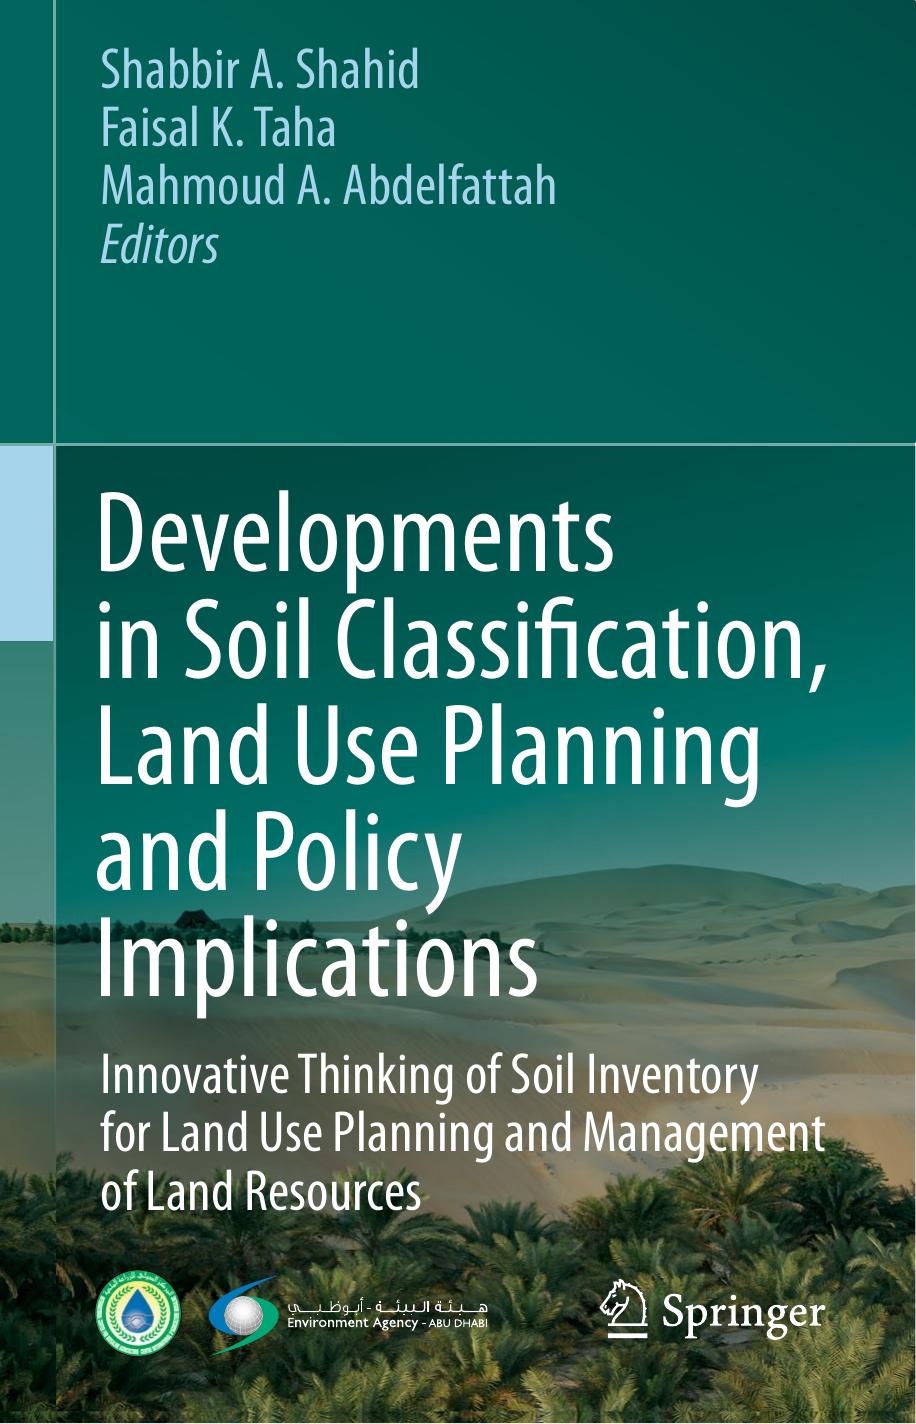 Developments in Soil Classification, Land Use Planning and Policy Implications  Innovative Thinking of Soil Inventory for Land Use Planning and Management of Land Resources 2013